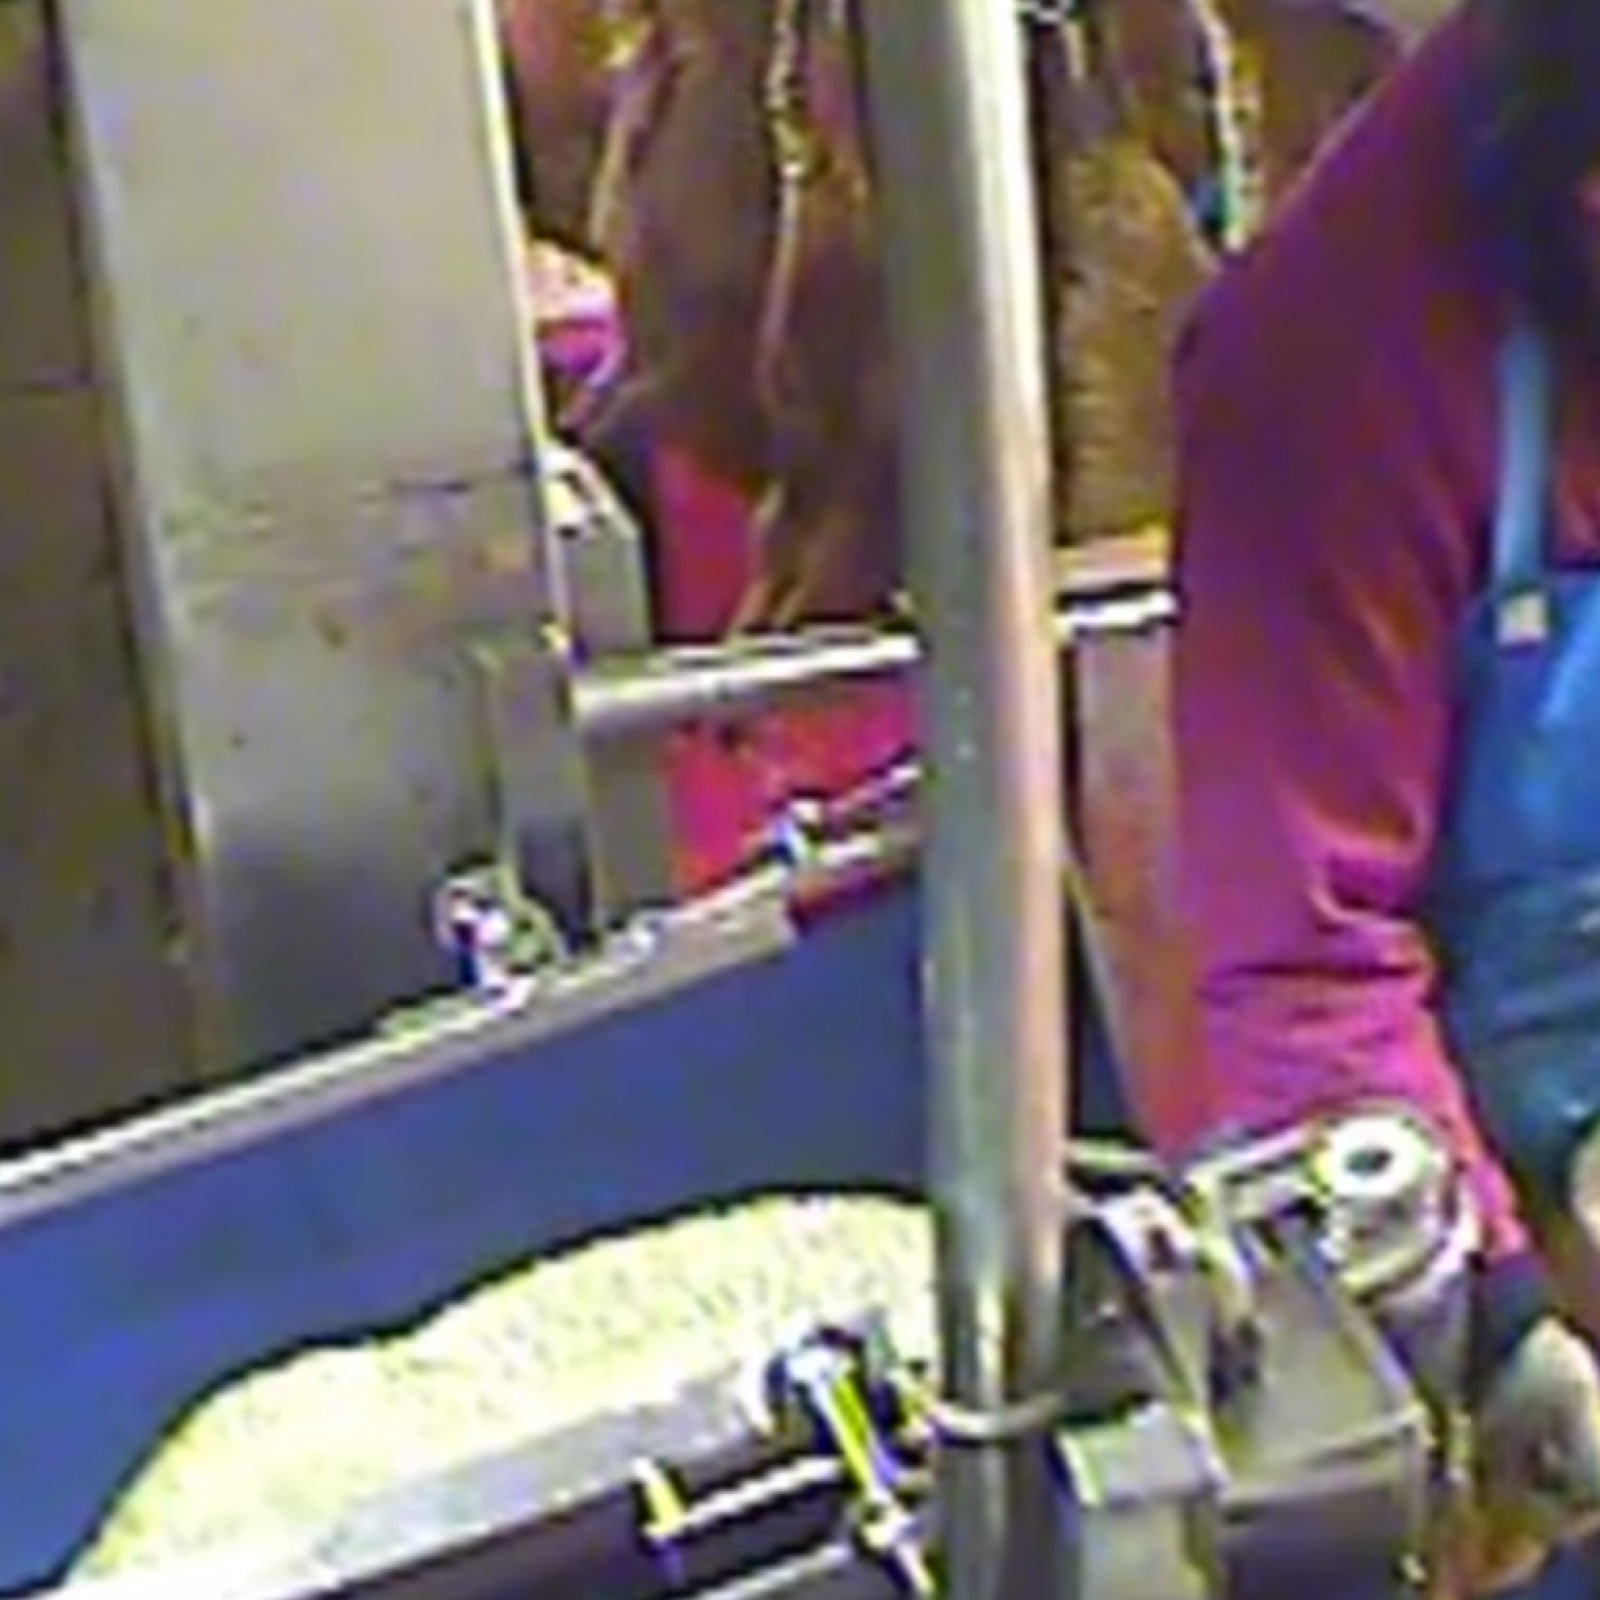 Animal Cruelty at Halal Slaughterhouse Highlights Widespread Abuse in UK